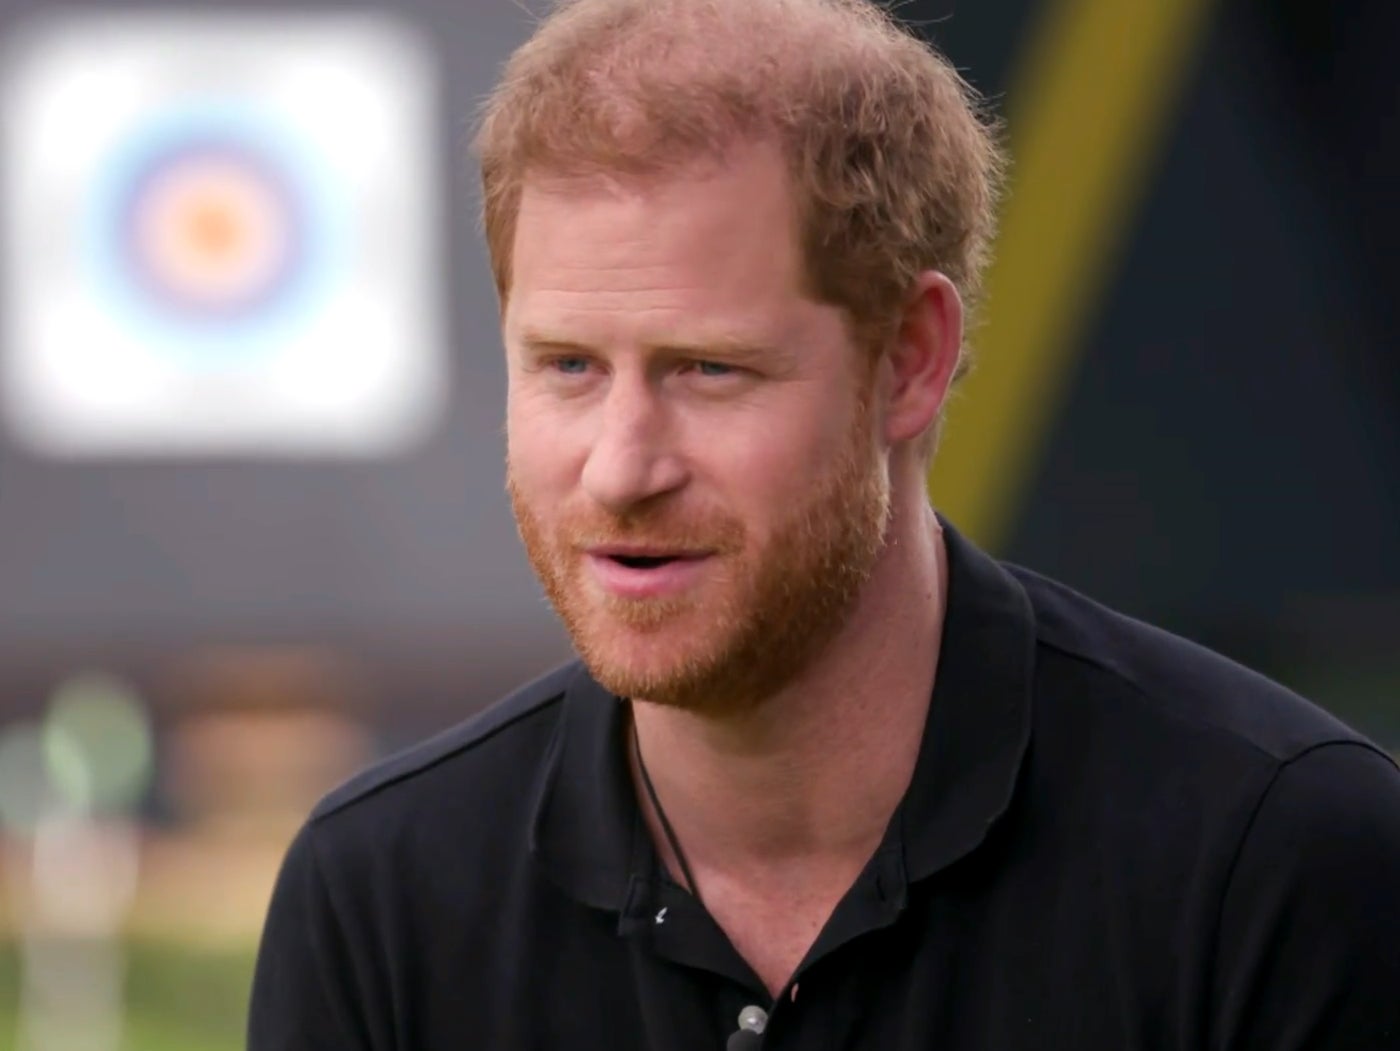 Prince Harry Full Interview With Hoda